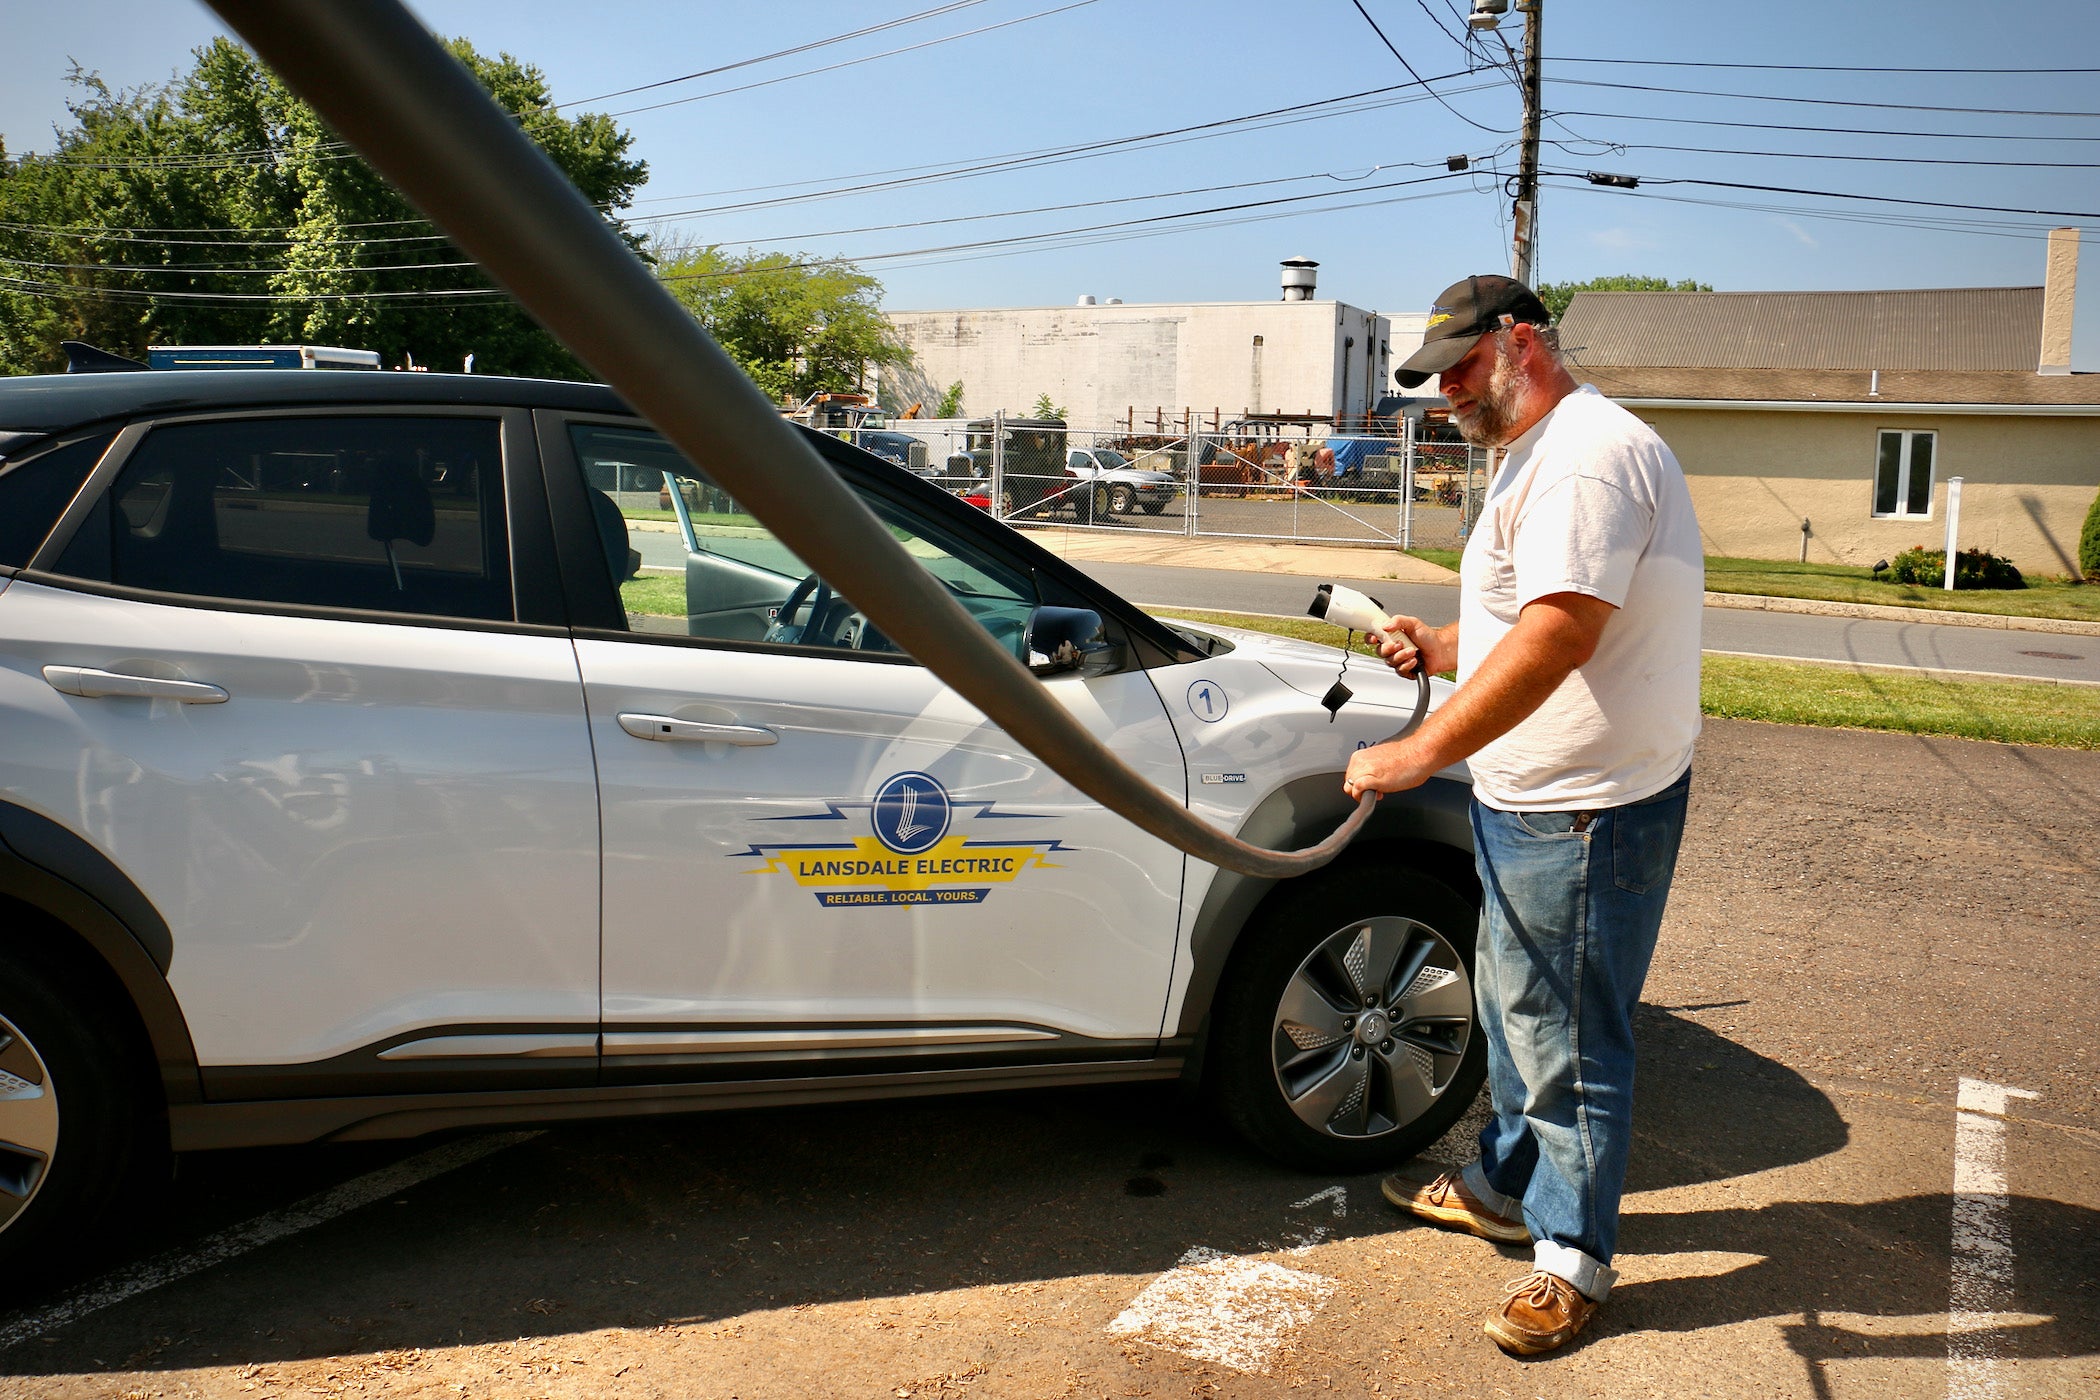 Philly’s suburban municipalities embrace electric vehicle revolution